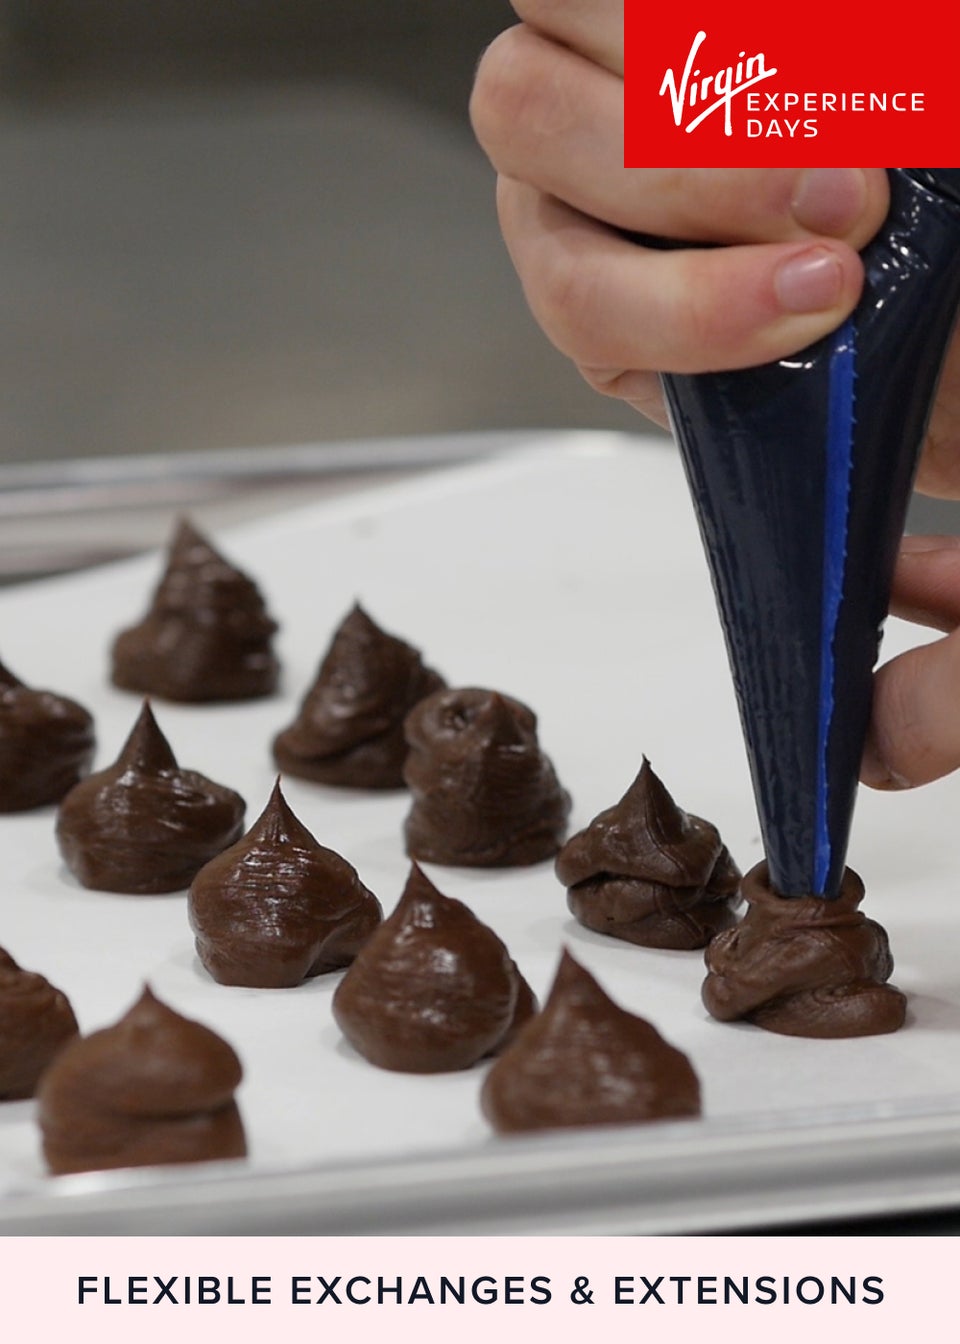 Virgin Experience Days Chocolate Bar Making Workshop for Two at York Cocoa Works